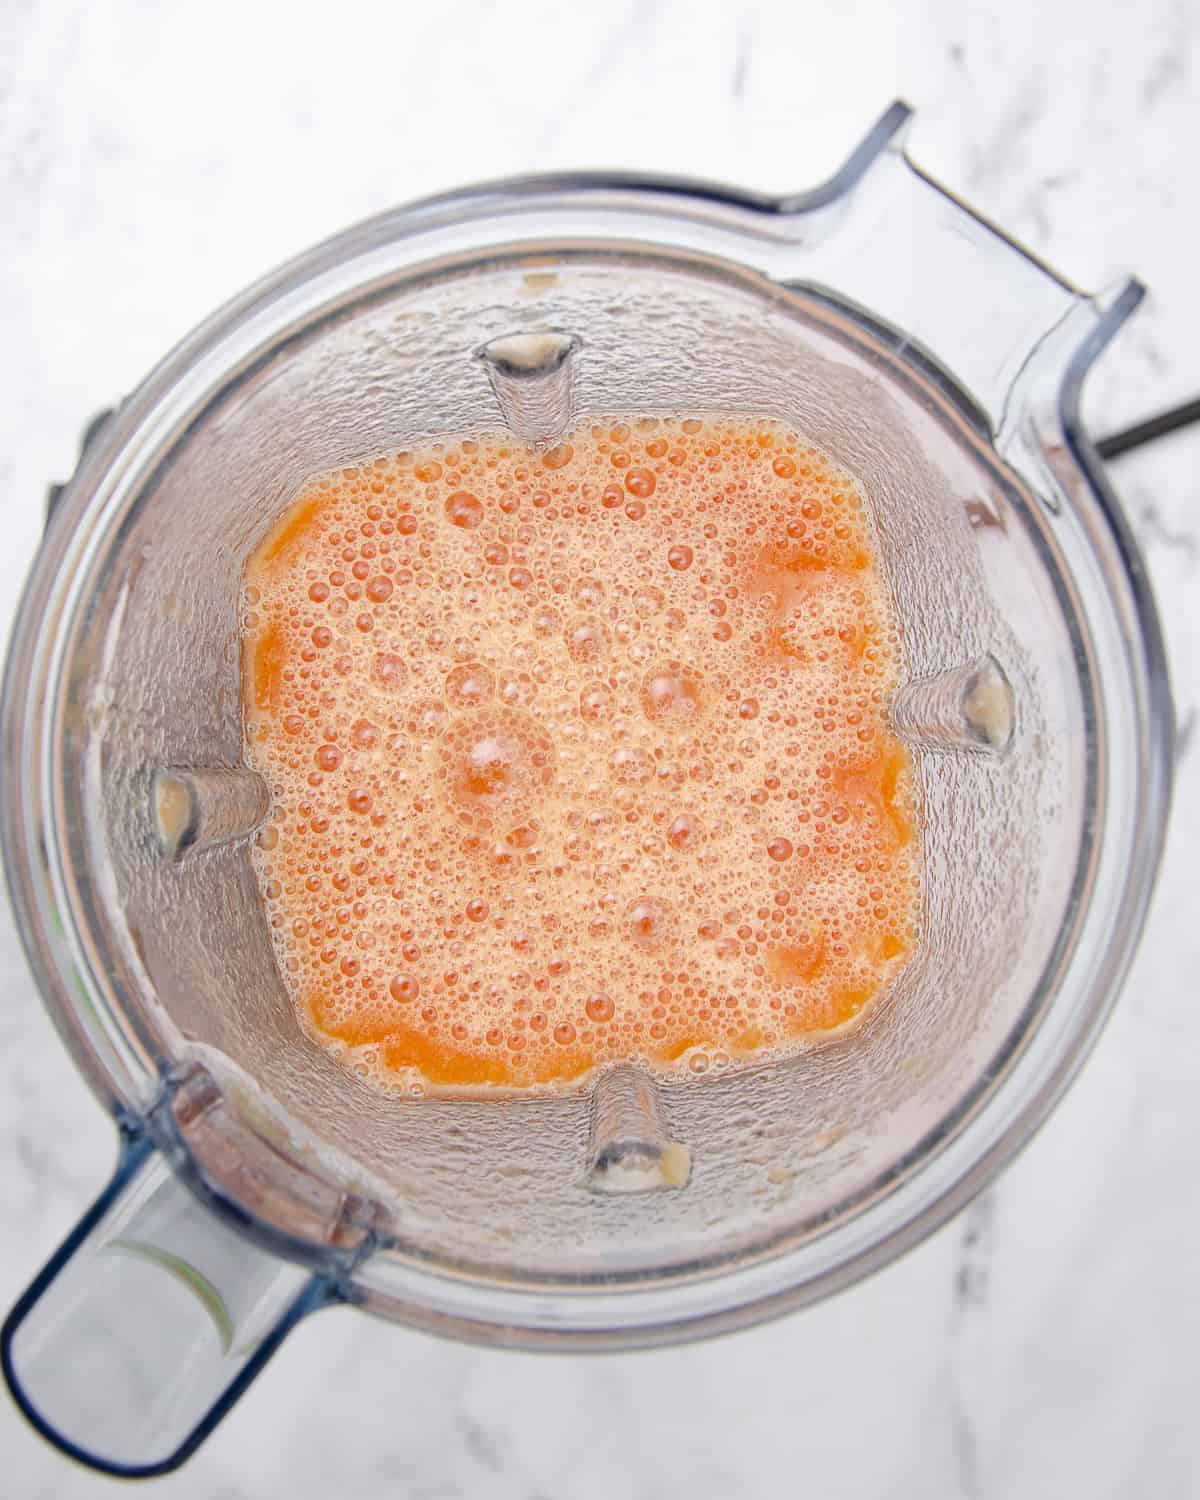 Blended tomato, onion, and vegetable broth in a blender.